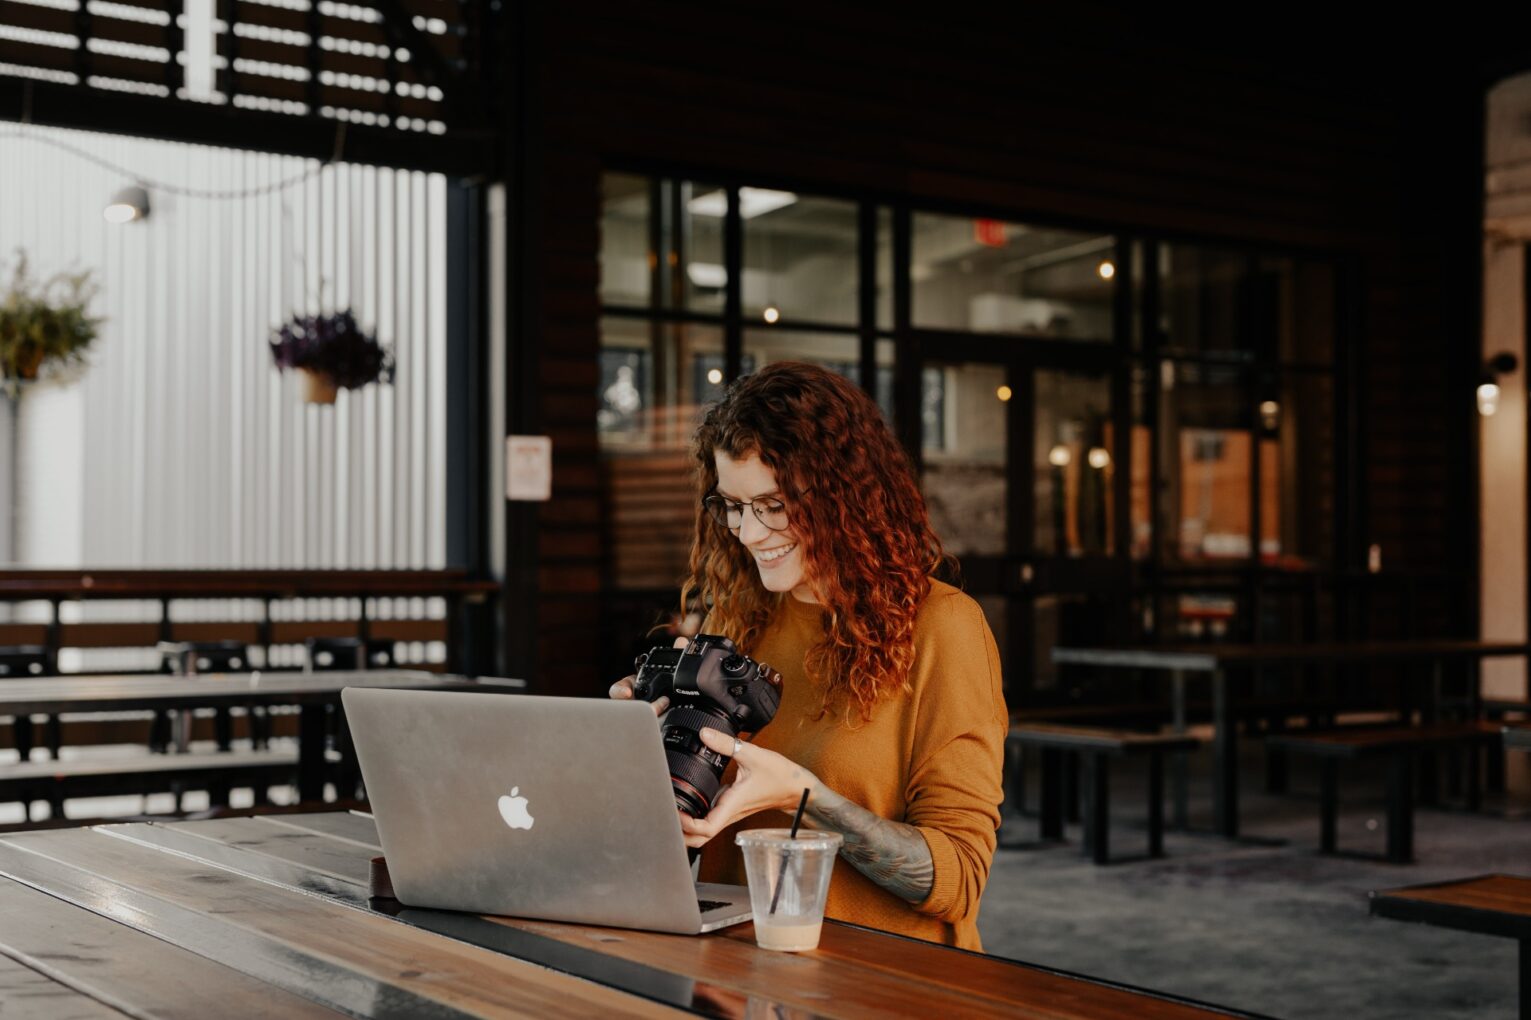 A woman sat in a coffee shop with a MacBook and a camera